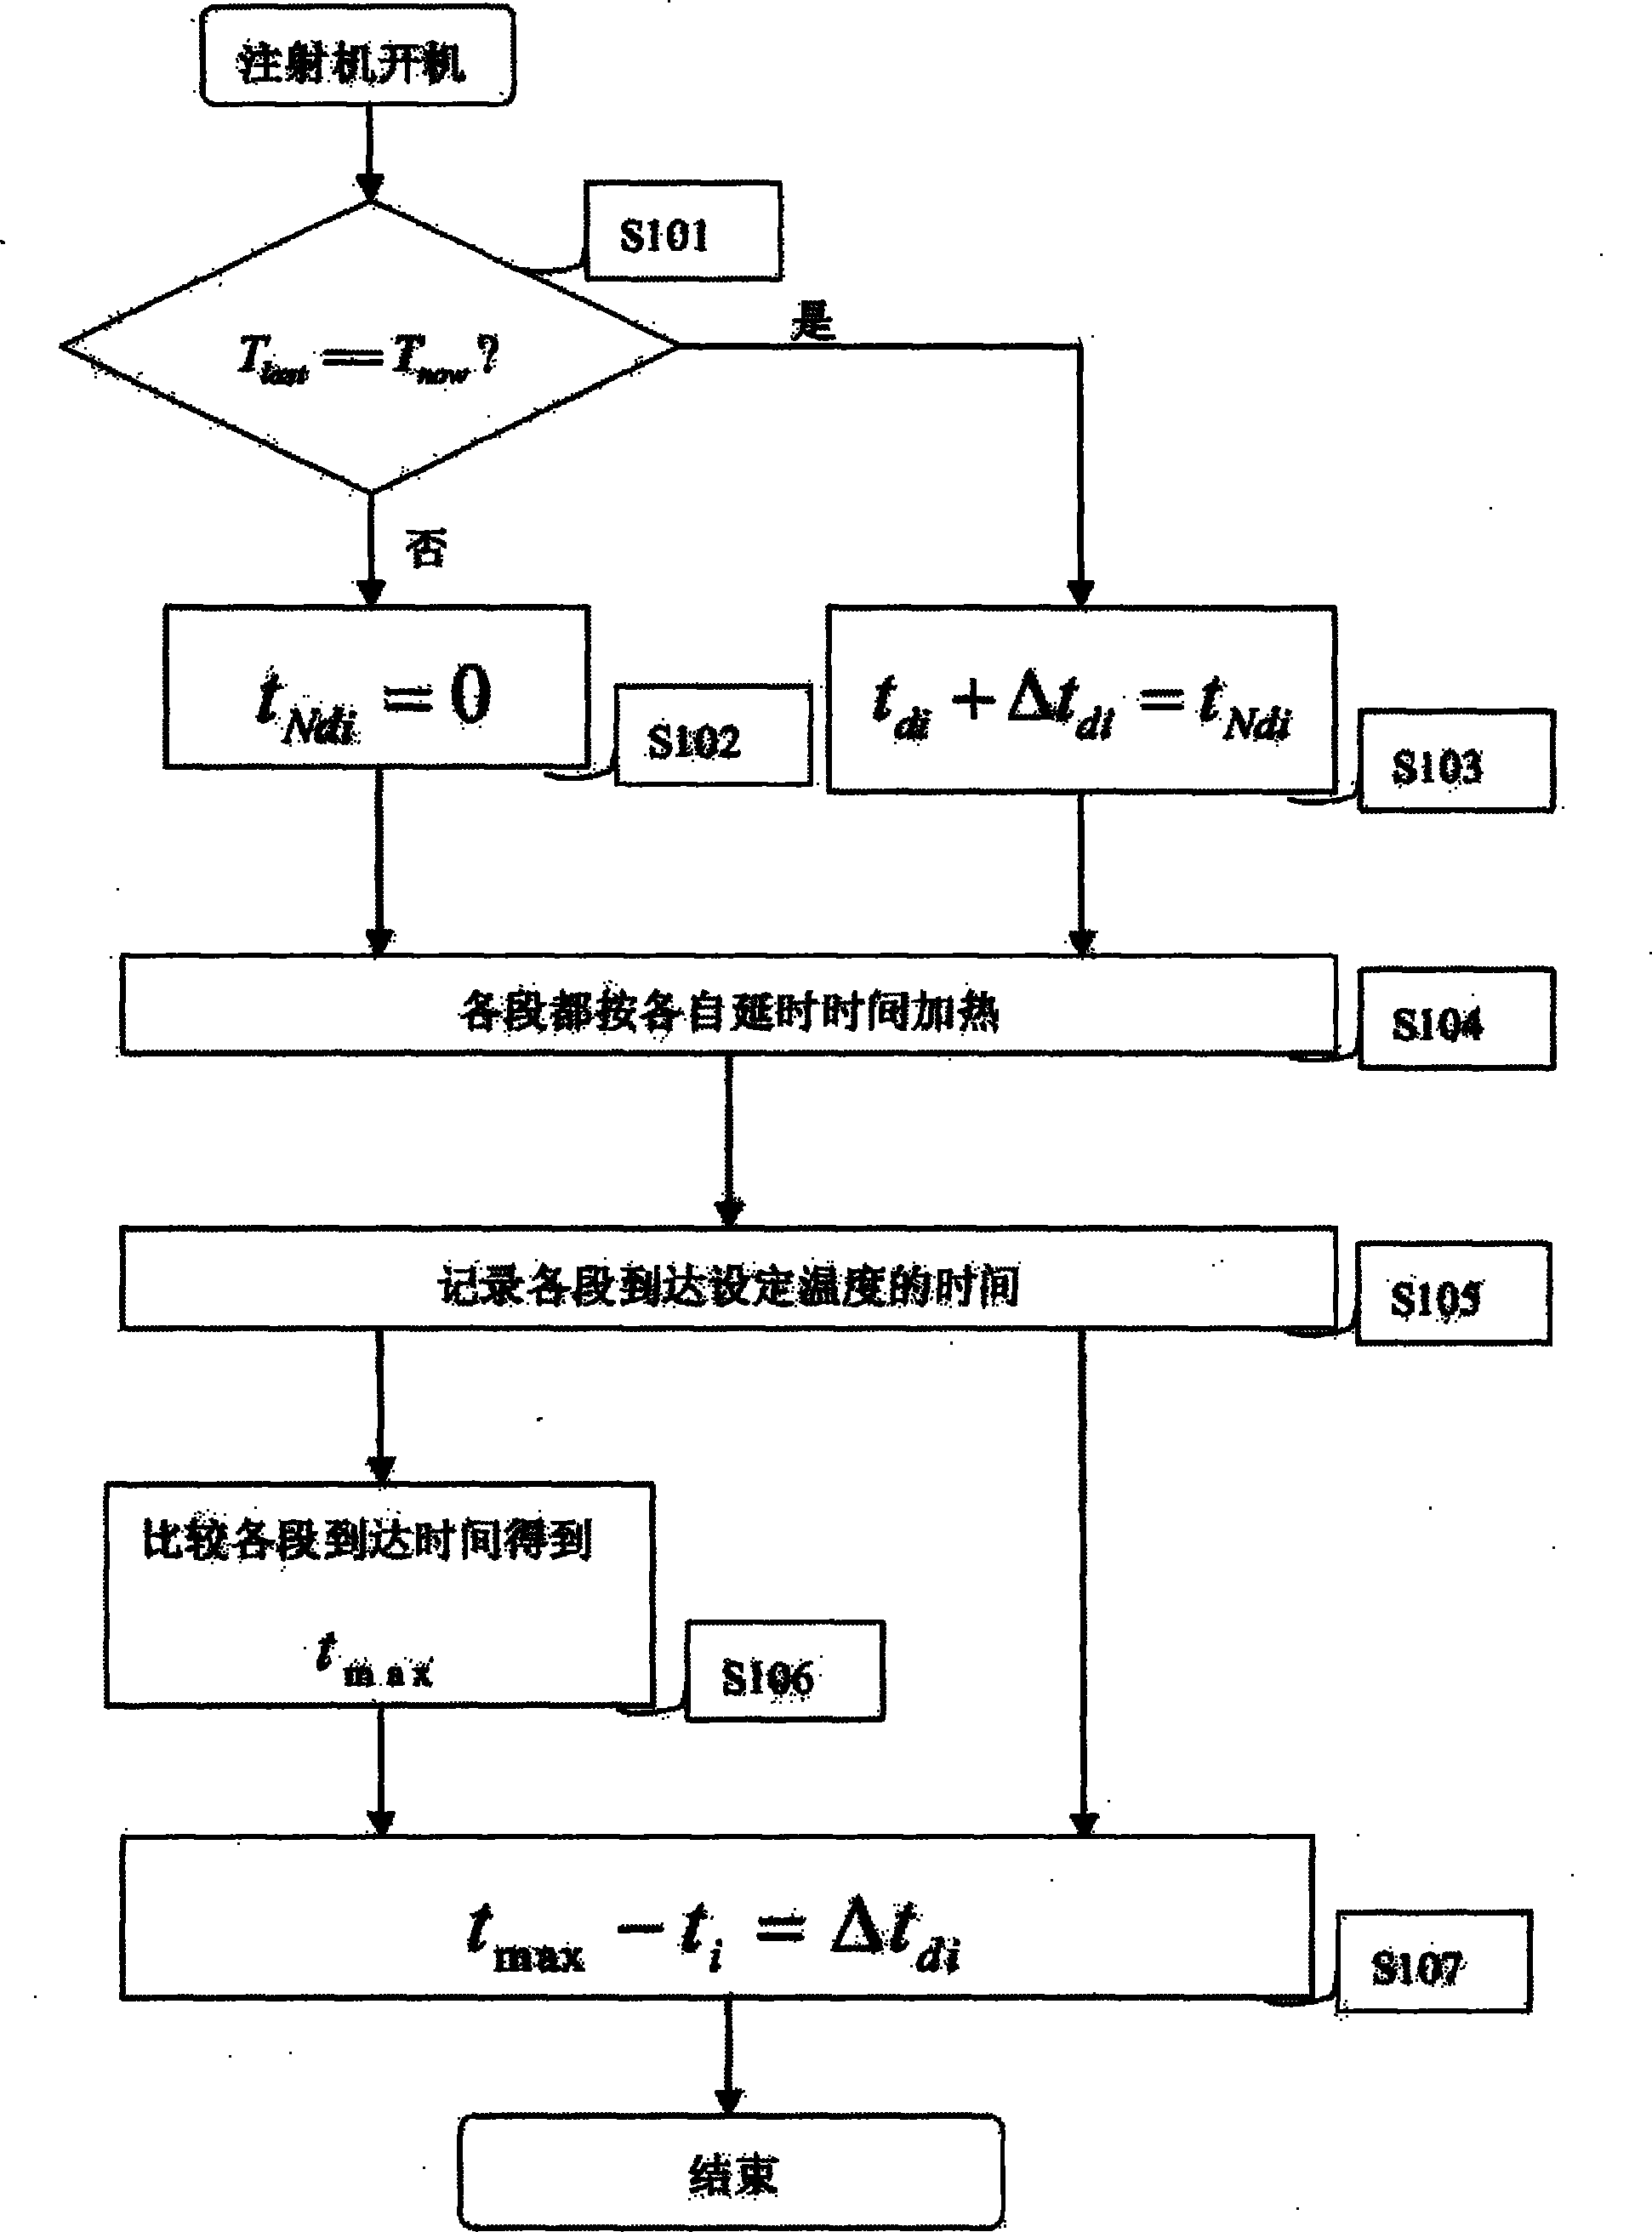 Temperature control method for reaching set temperature at equal time intervals at preheating stage of plastic machinery